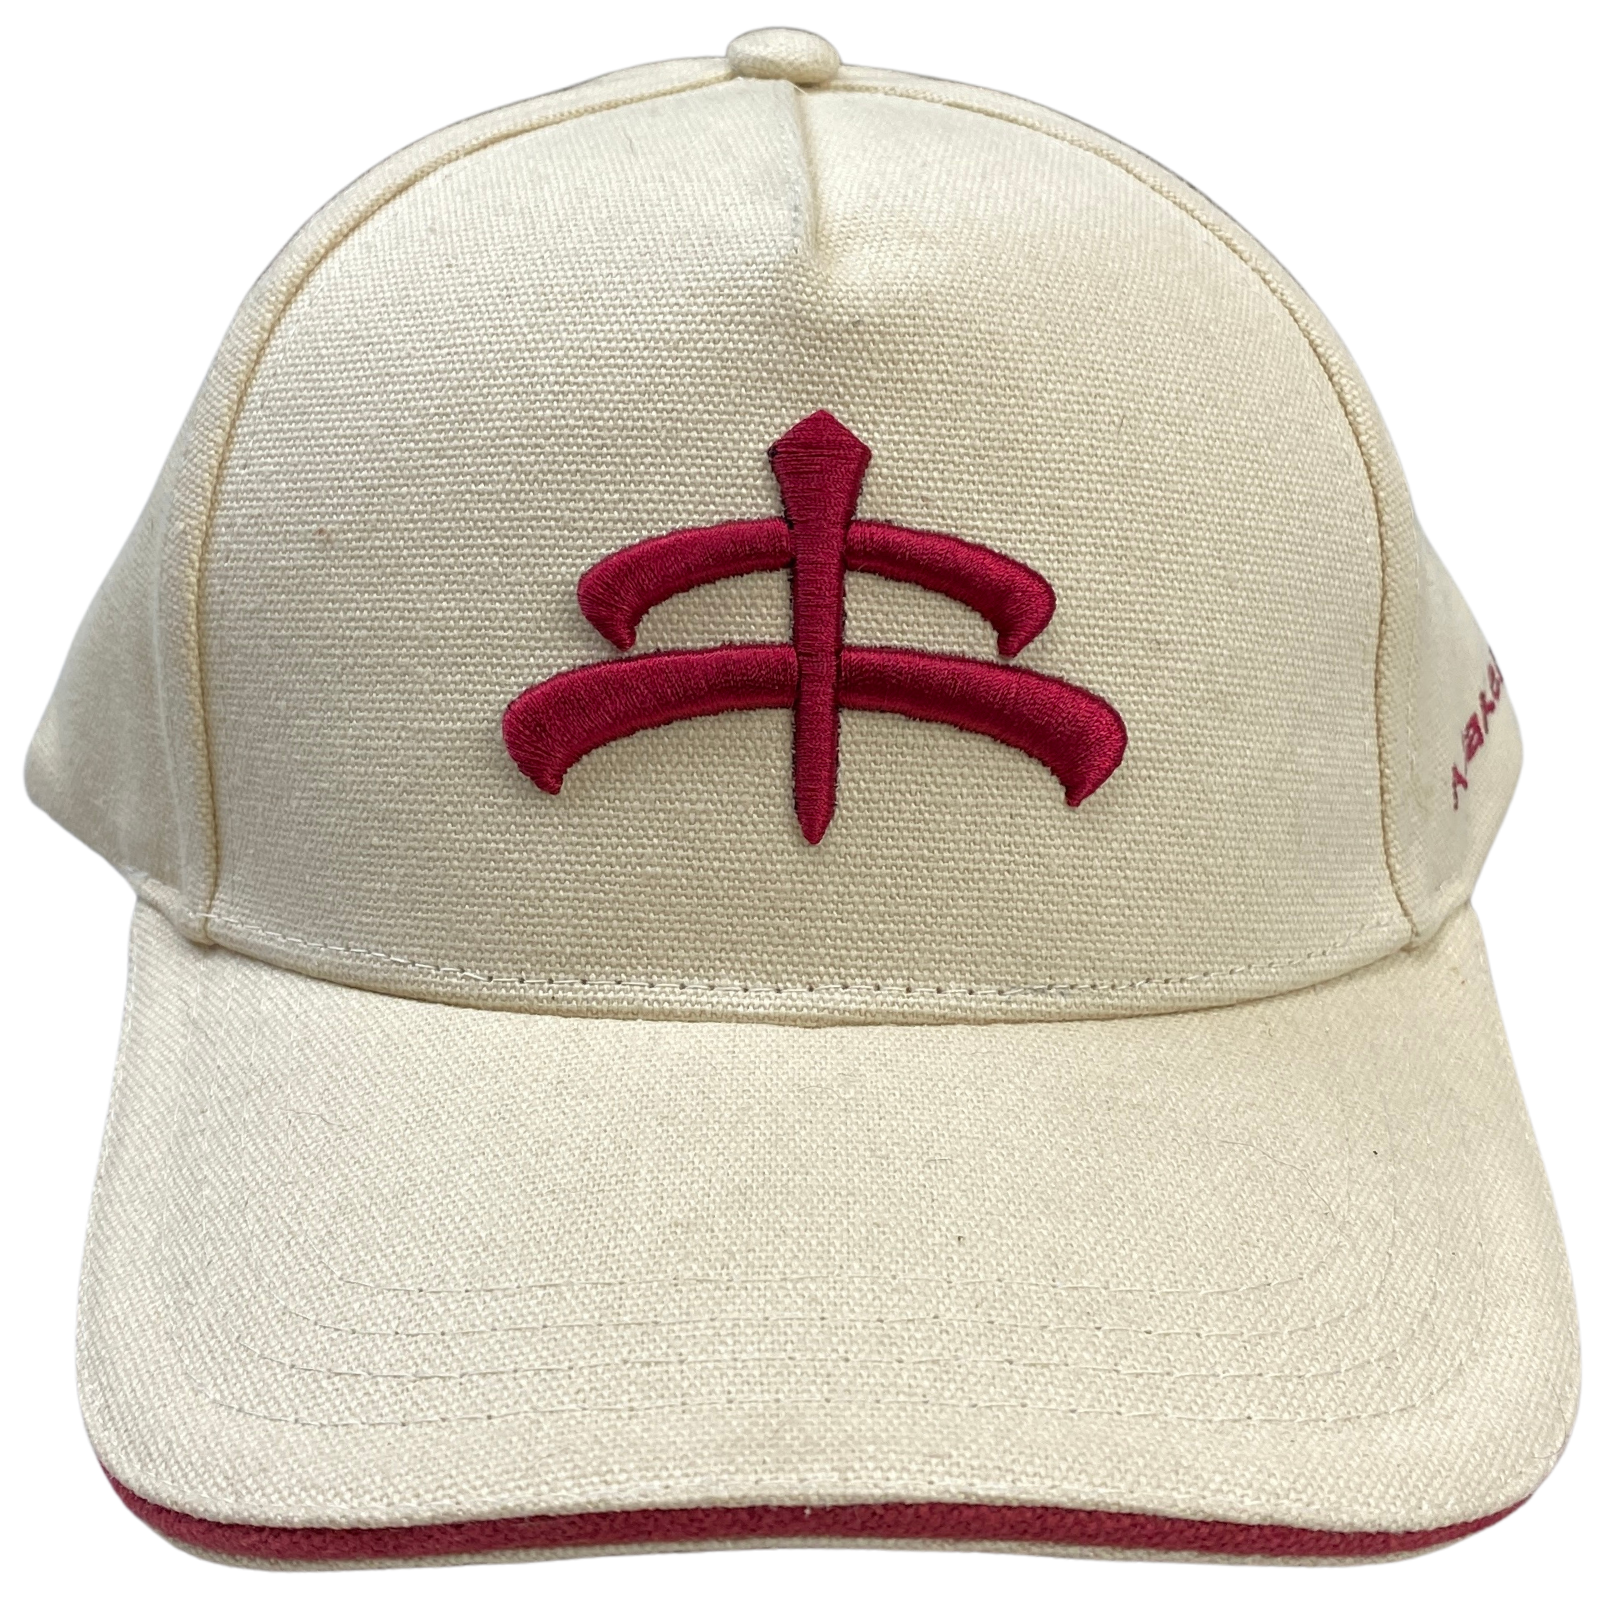 MaKeBe Ball Cap in Tan/Red